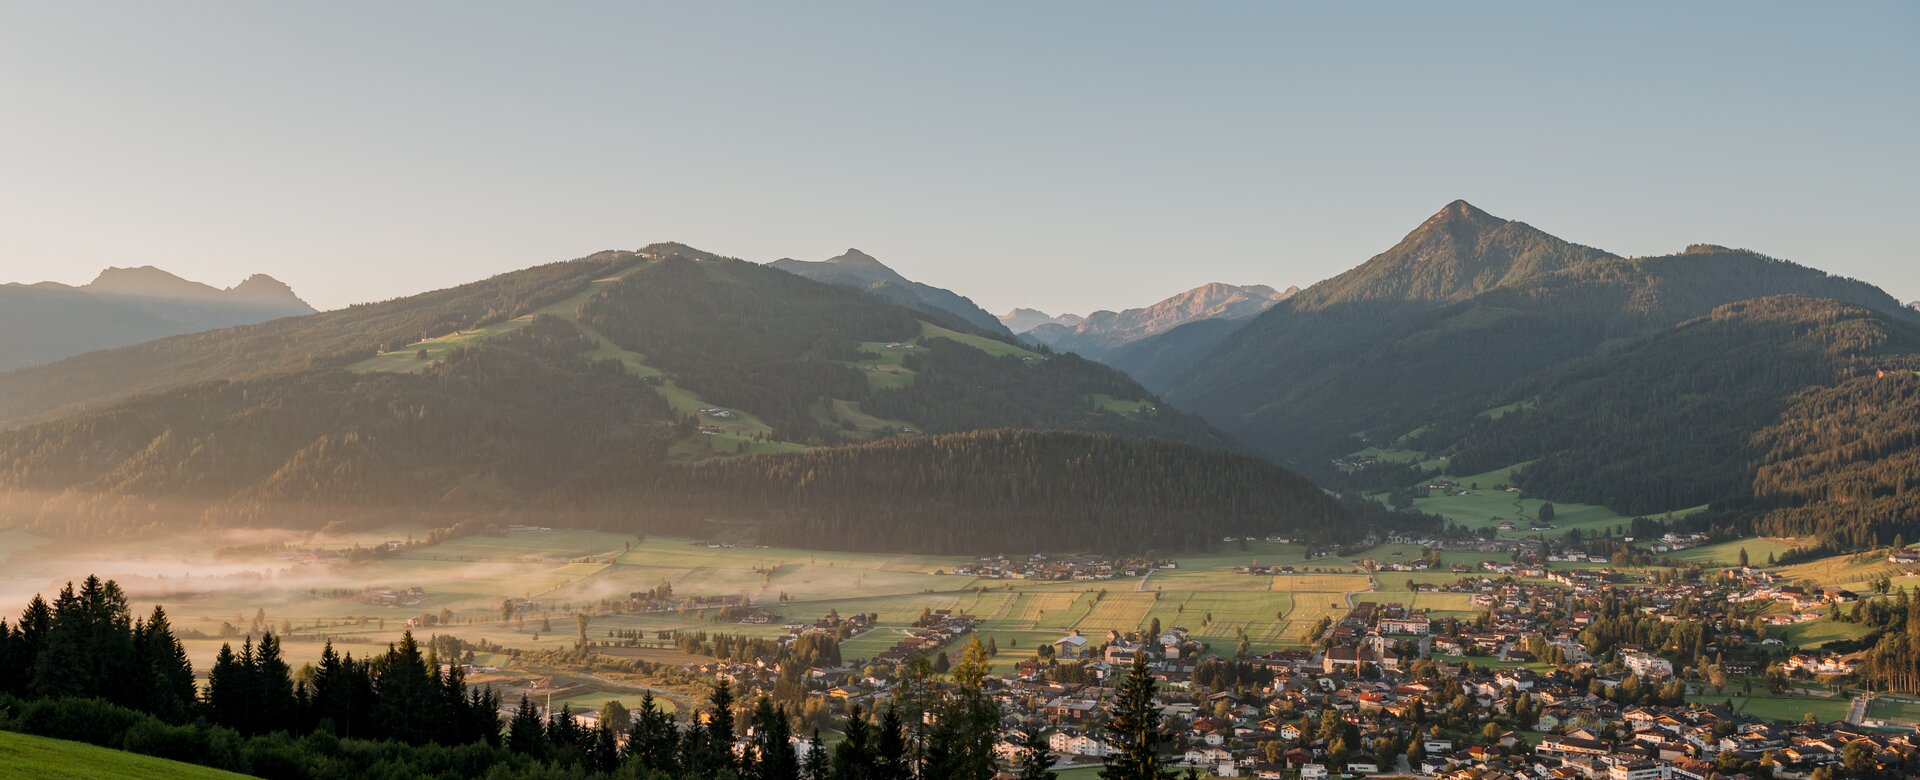 View of a village in the valley and the sun is just beginning to illuminate a few spots and dispel the morning mist | © Matthias Fritzenwallner